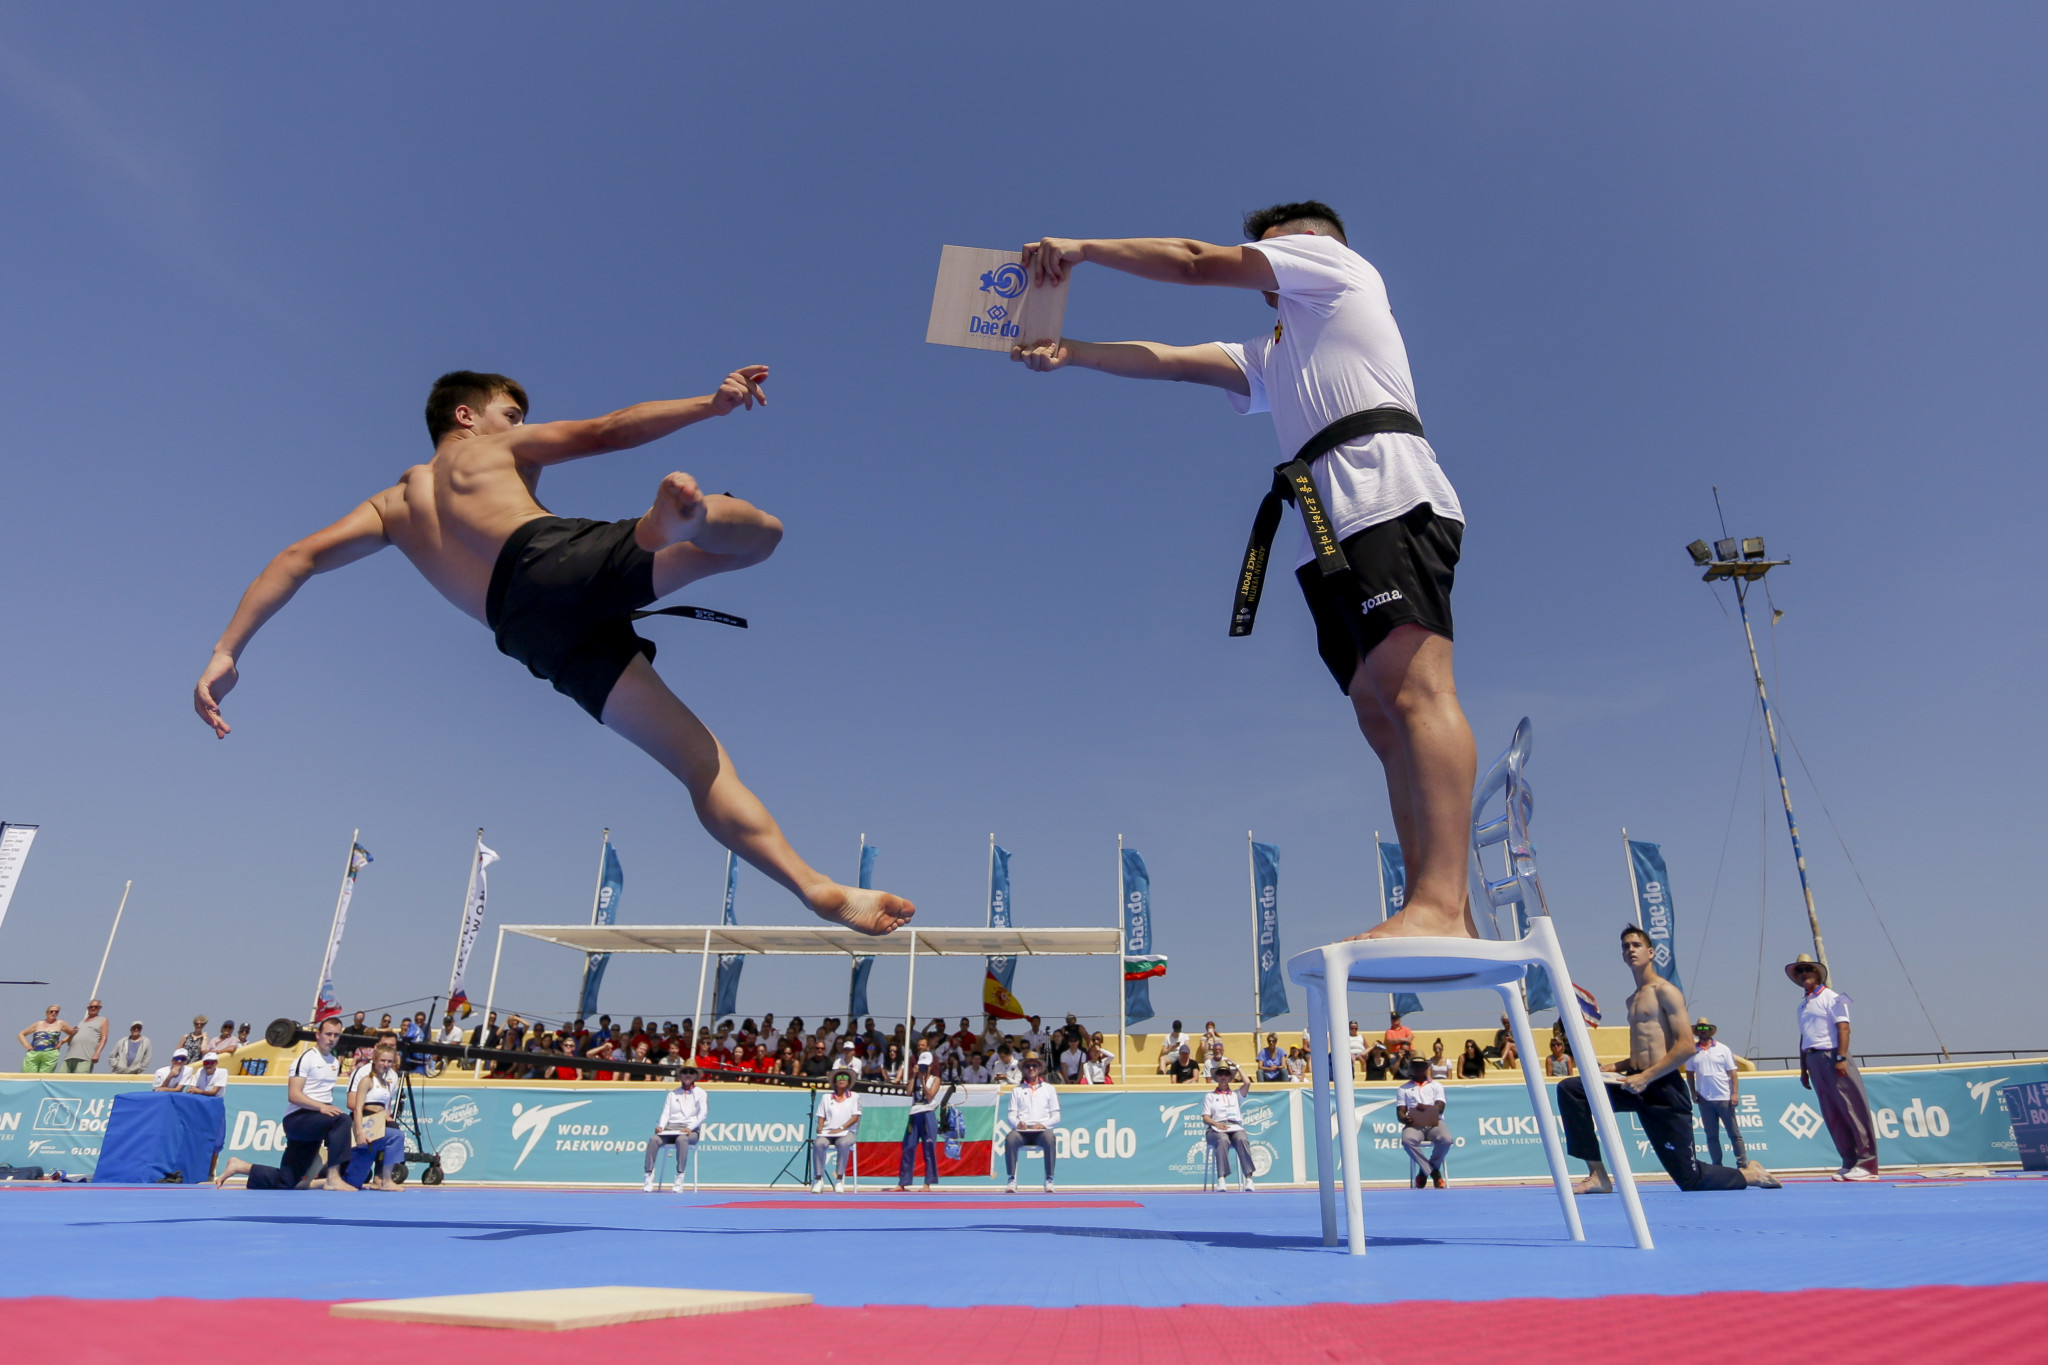 Thailand claimed five gold medals on the third day of competition at the World Taekwondo Beach Championships in Rhodes ©World Taekwondo